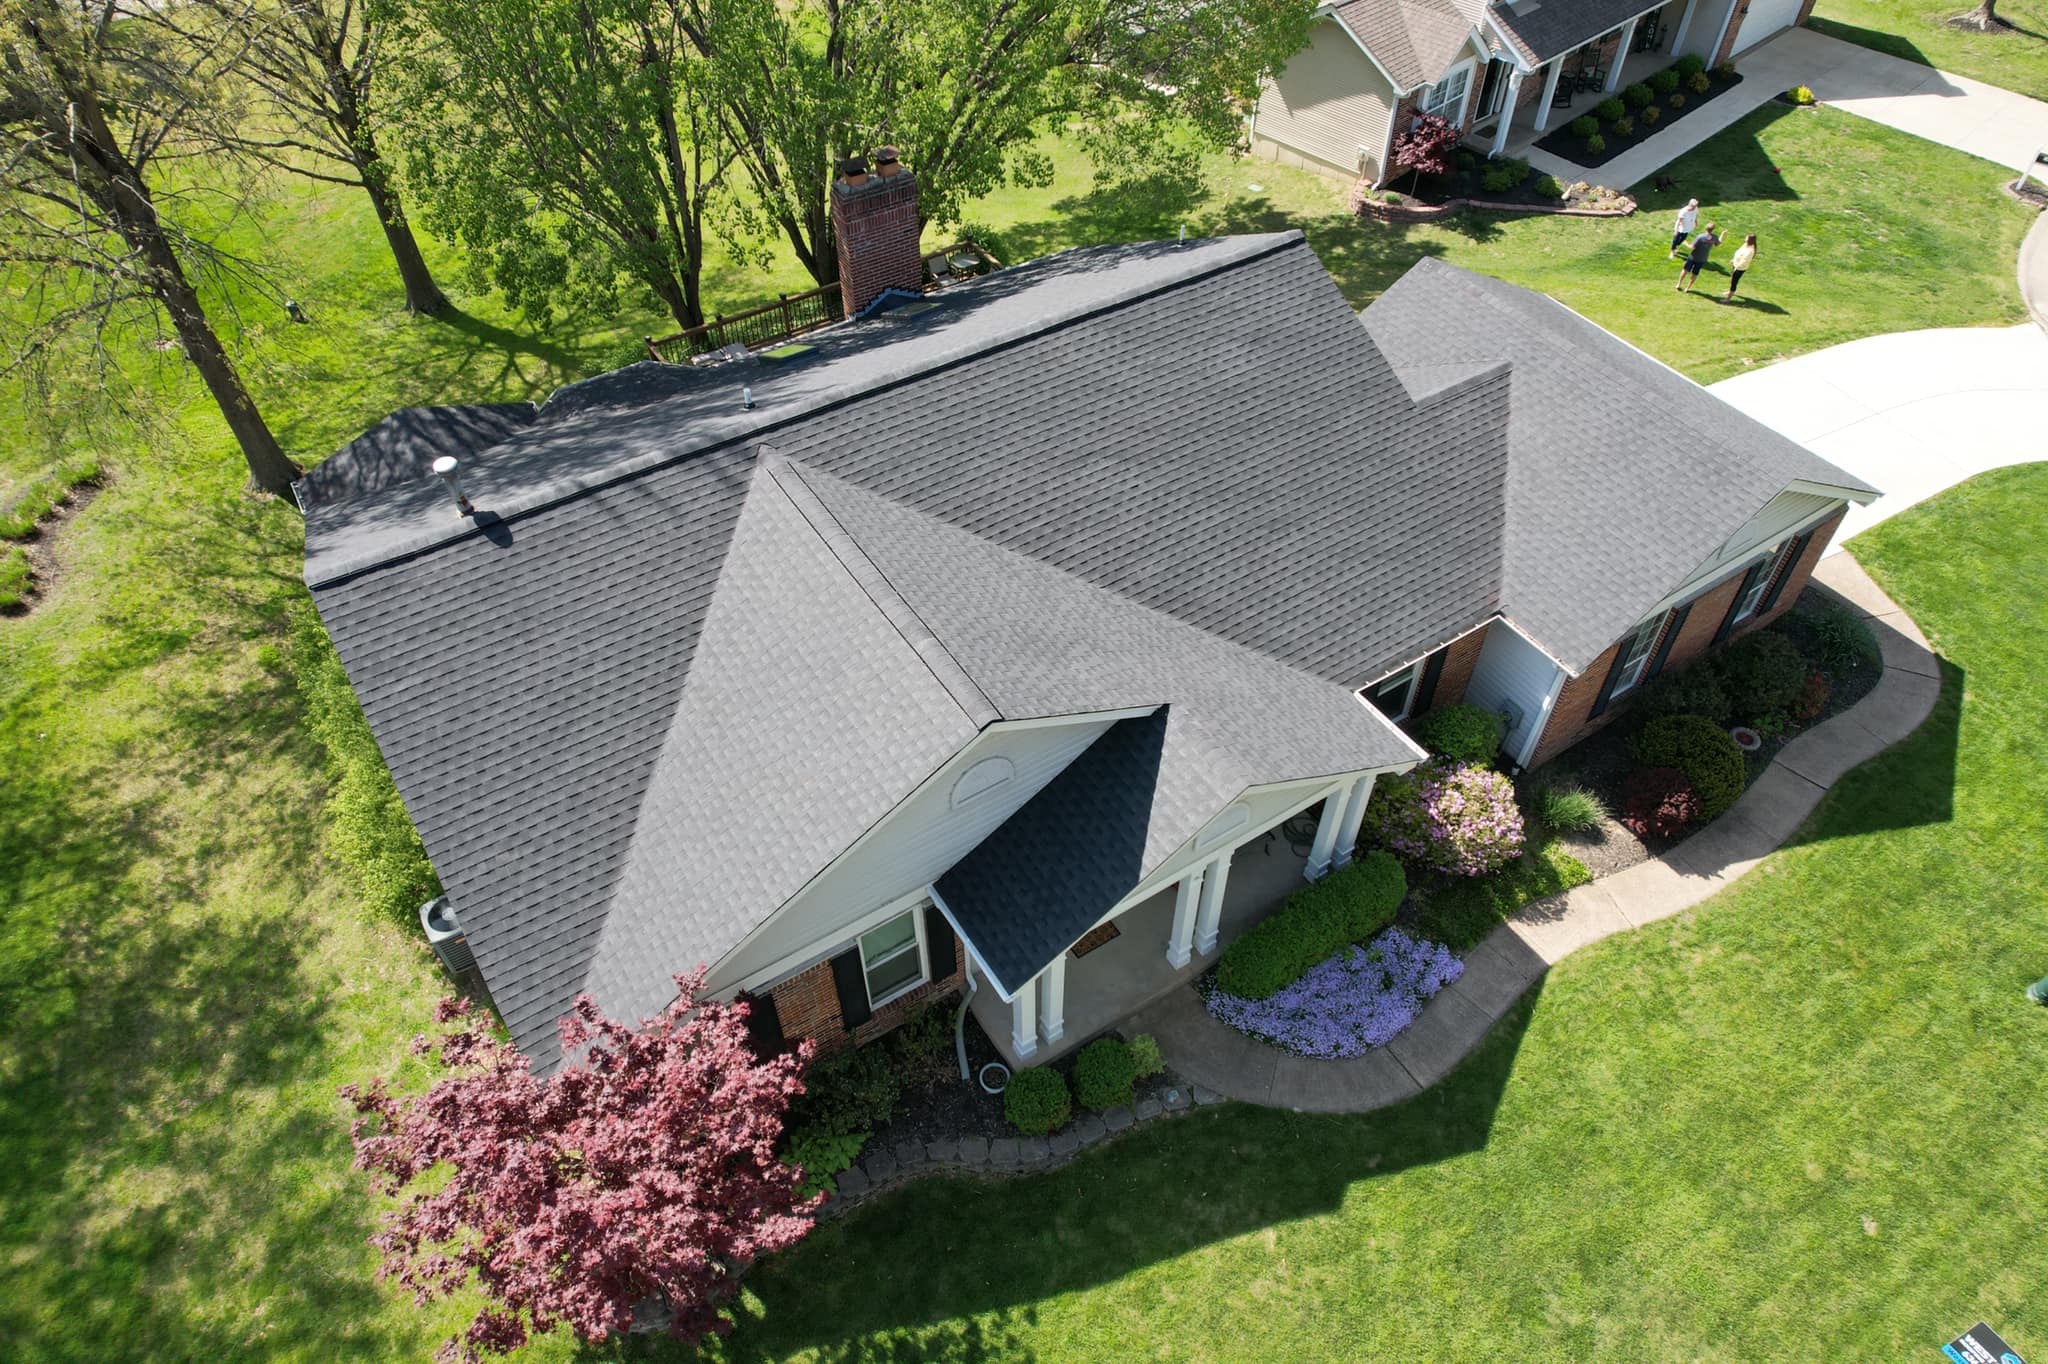 Shingle roof on a home in Chesterfield, MO